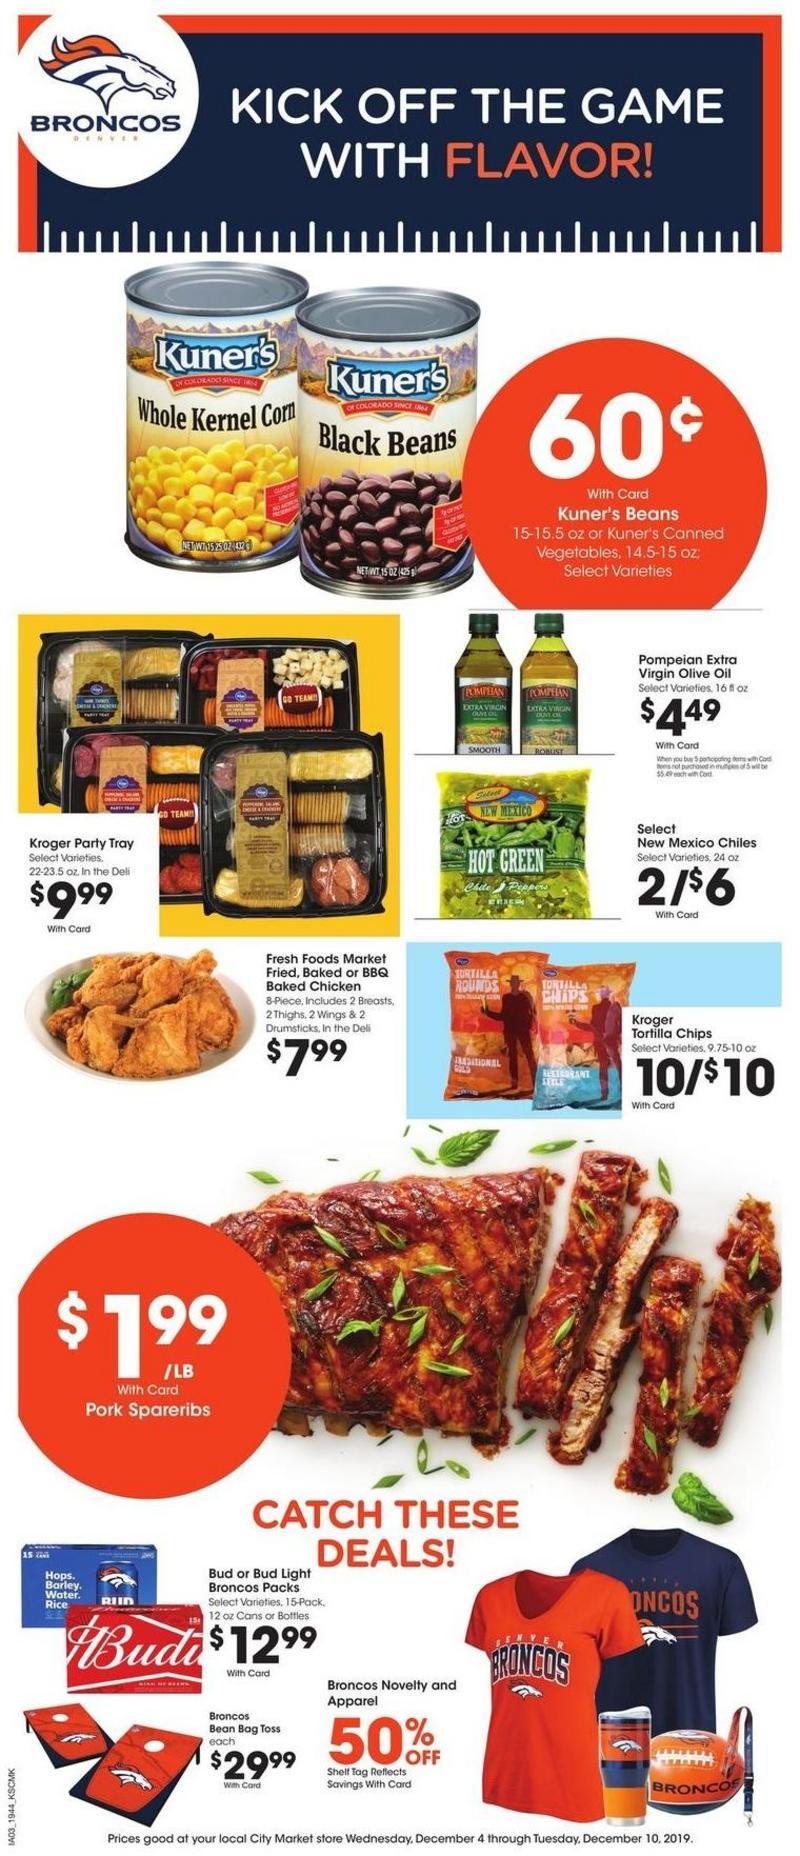 City Market Weekly Ad from December 4